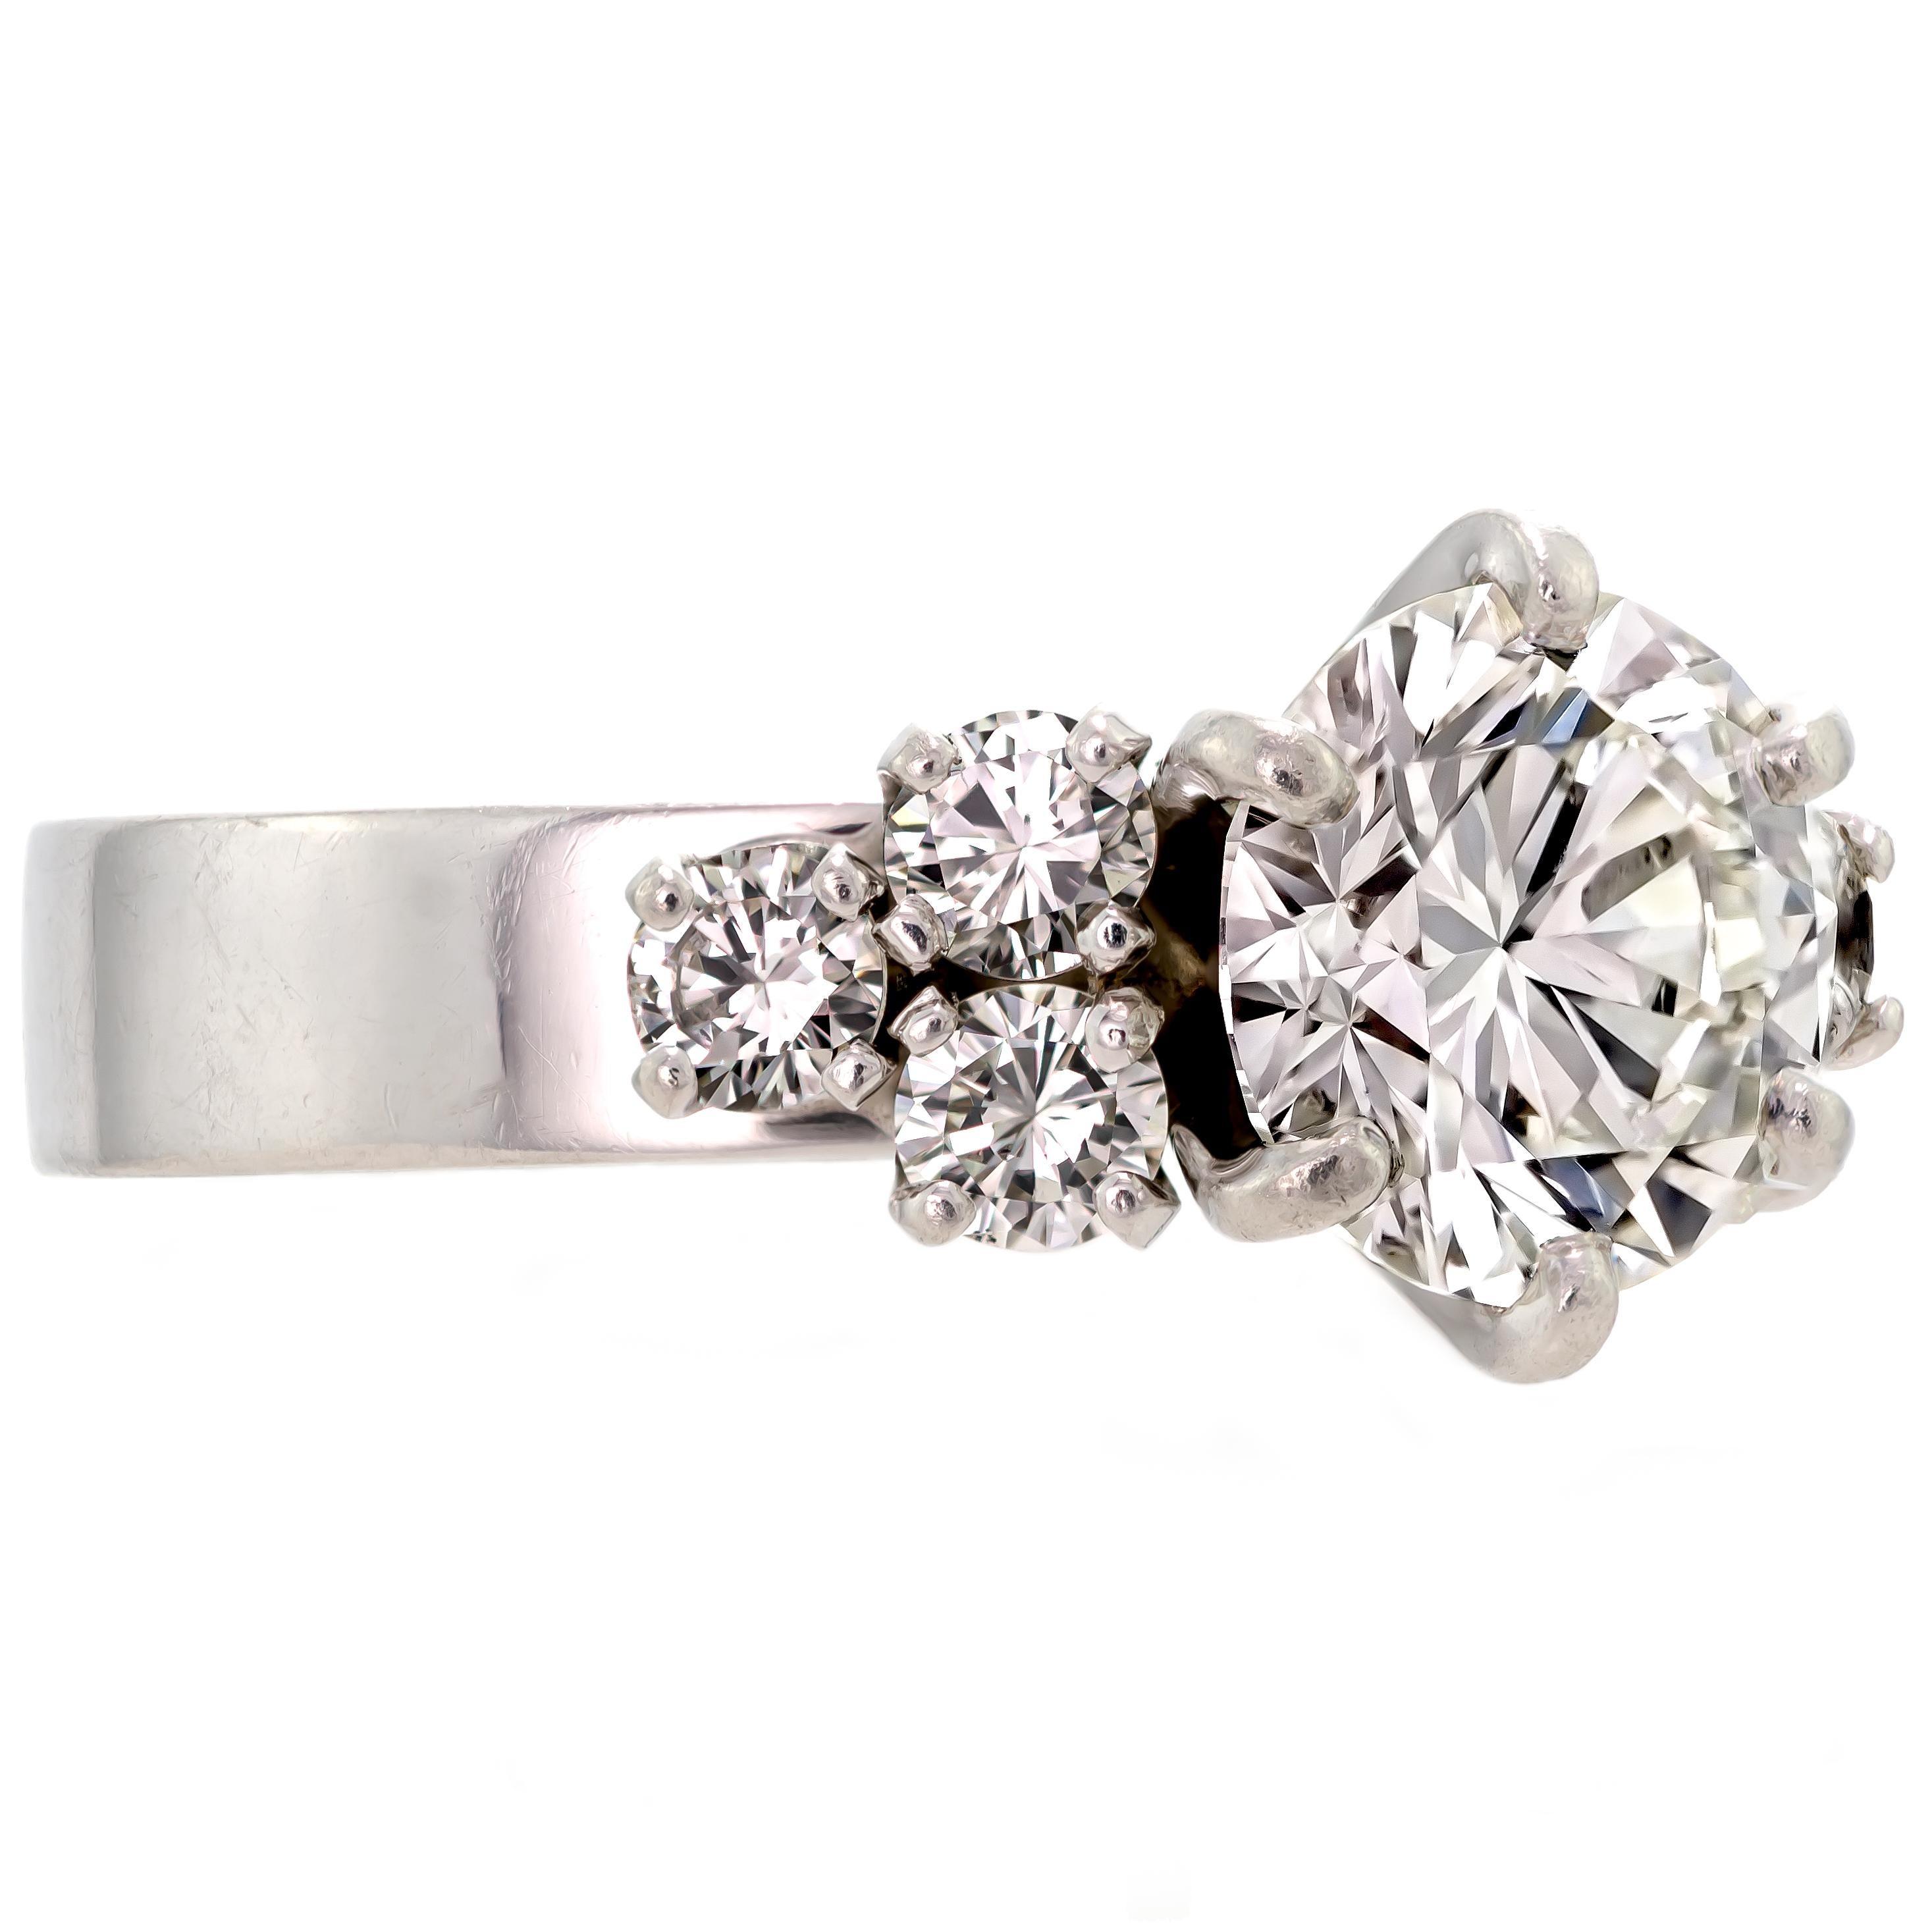 This sensational and glistening engagement ring spotlights one prong set radiant round brilliant cut diamond, flanked by three luminous round brilliant cut diamonds. All set into a timeless high polished platinum mount.  Who wouldn't love this